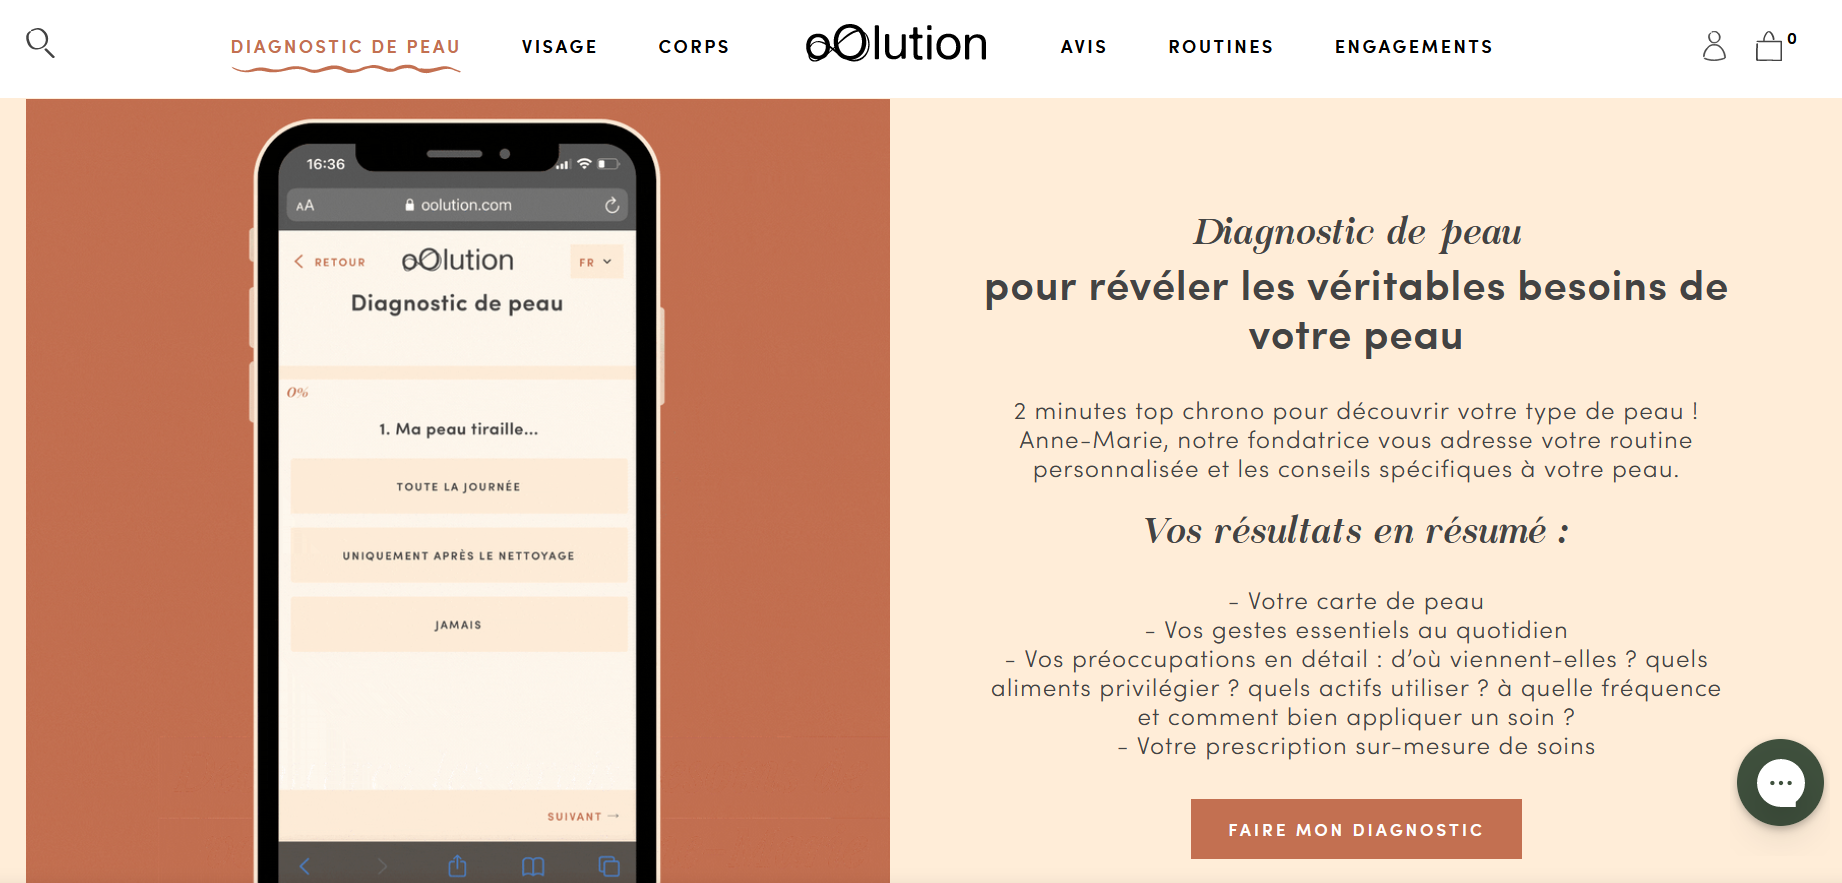 landing page exemple oOlution